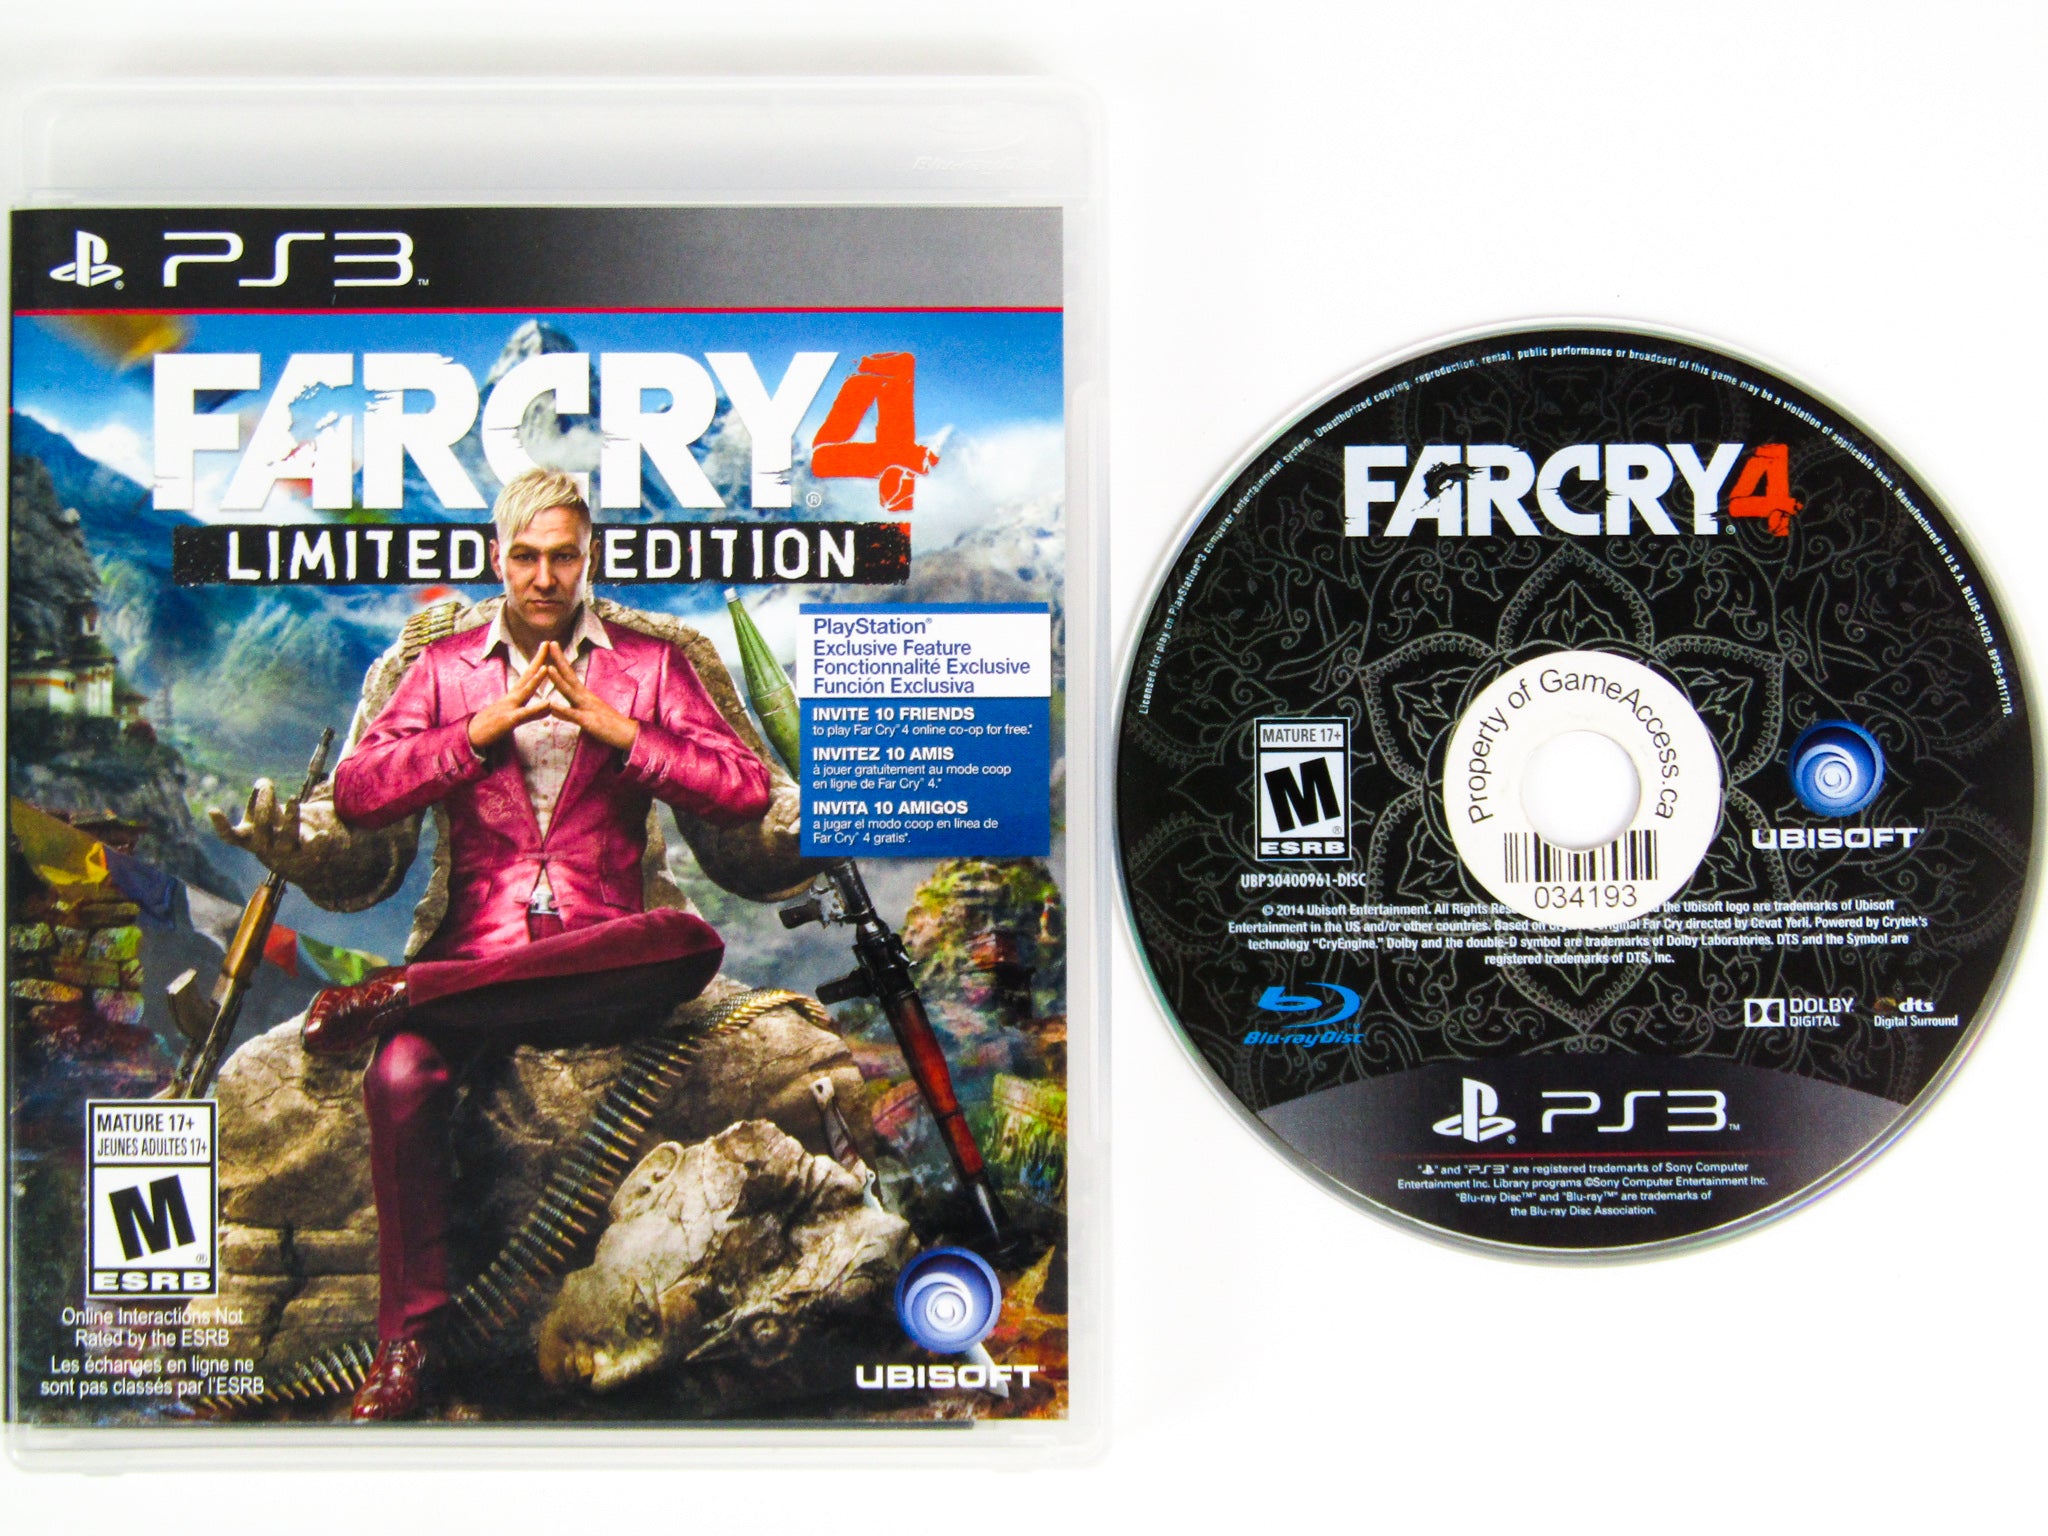 Far Cry 4 [Limited Edition](Playstation3 PS3) Game